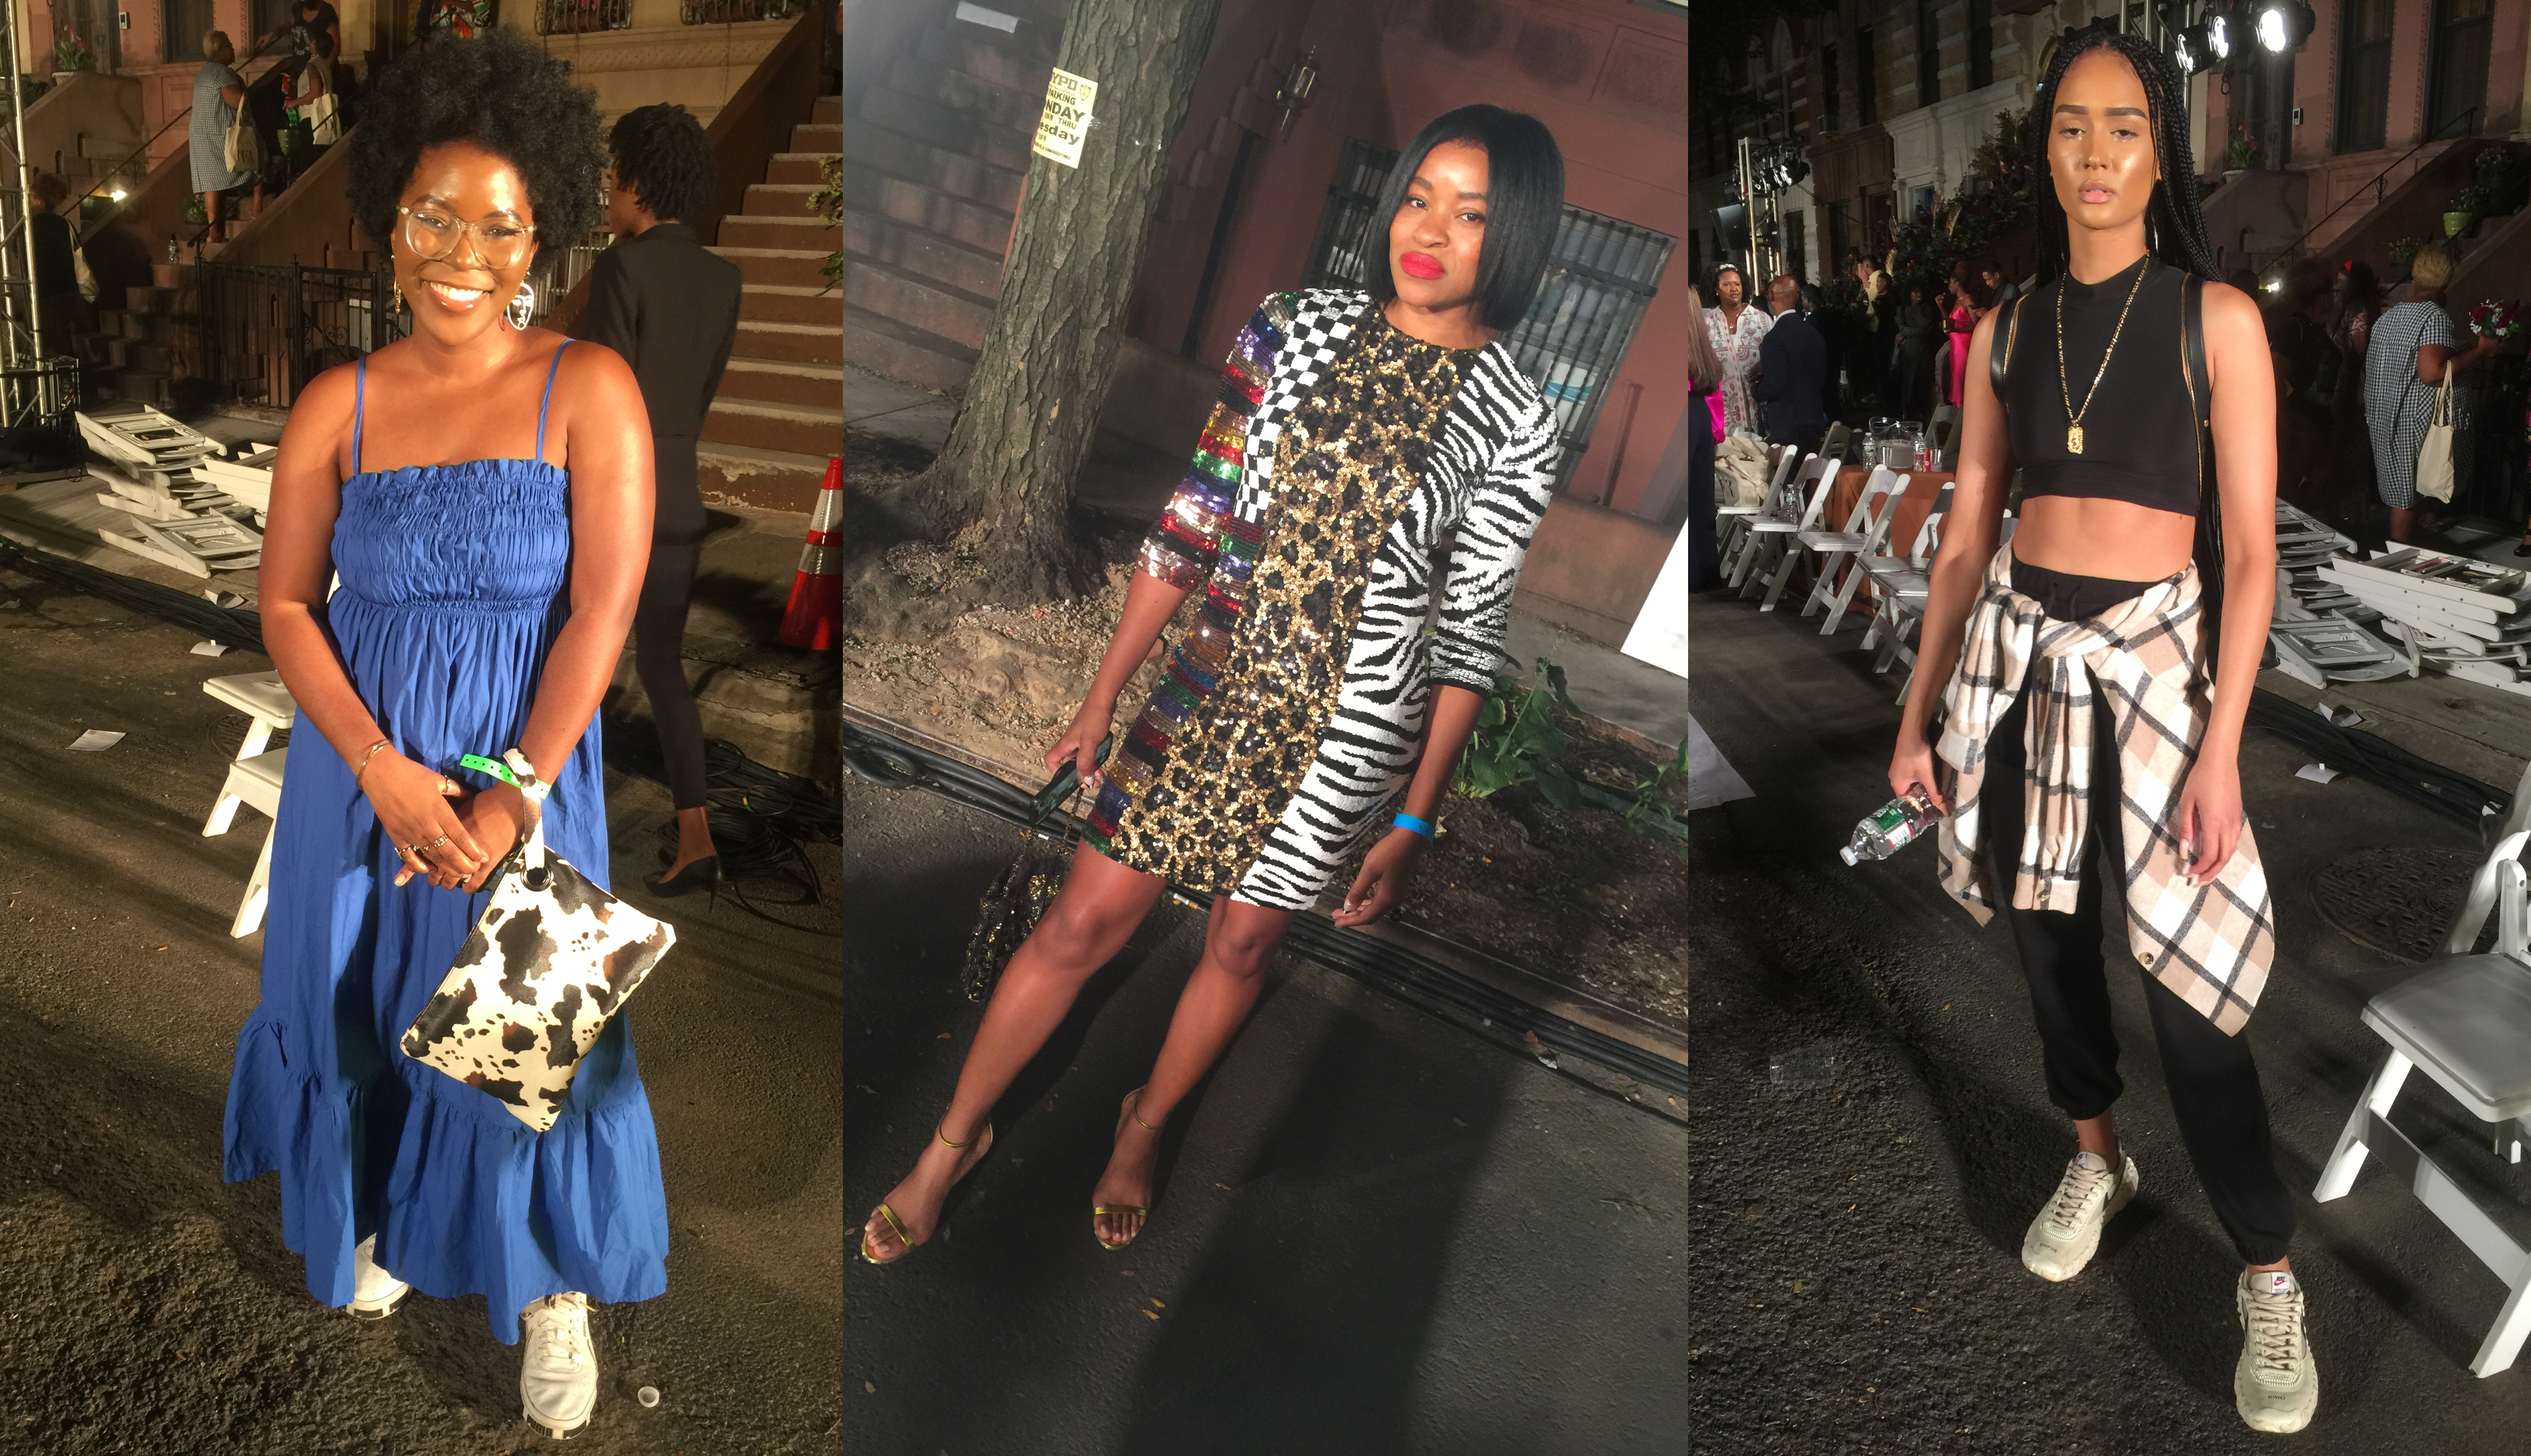 HFR Celebrates 15th Anniversary Fashion Show and Style Awards